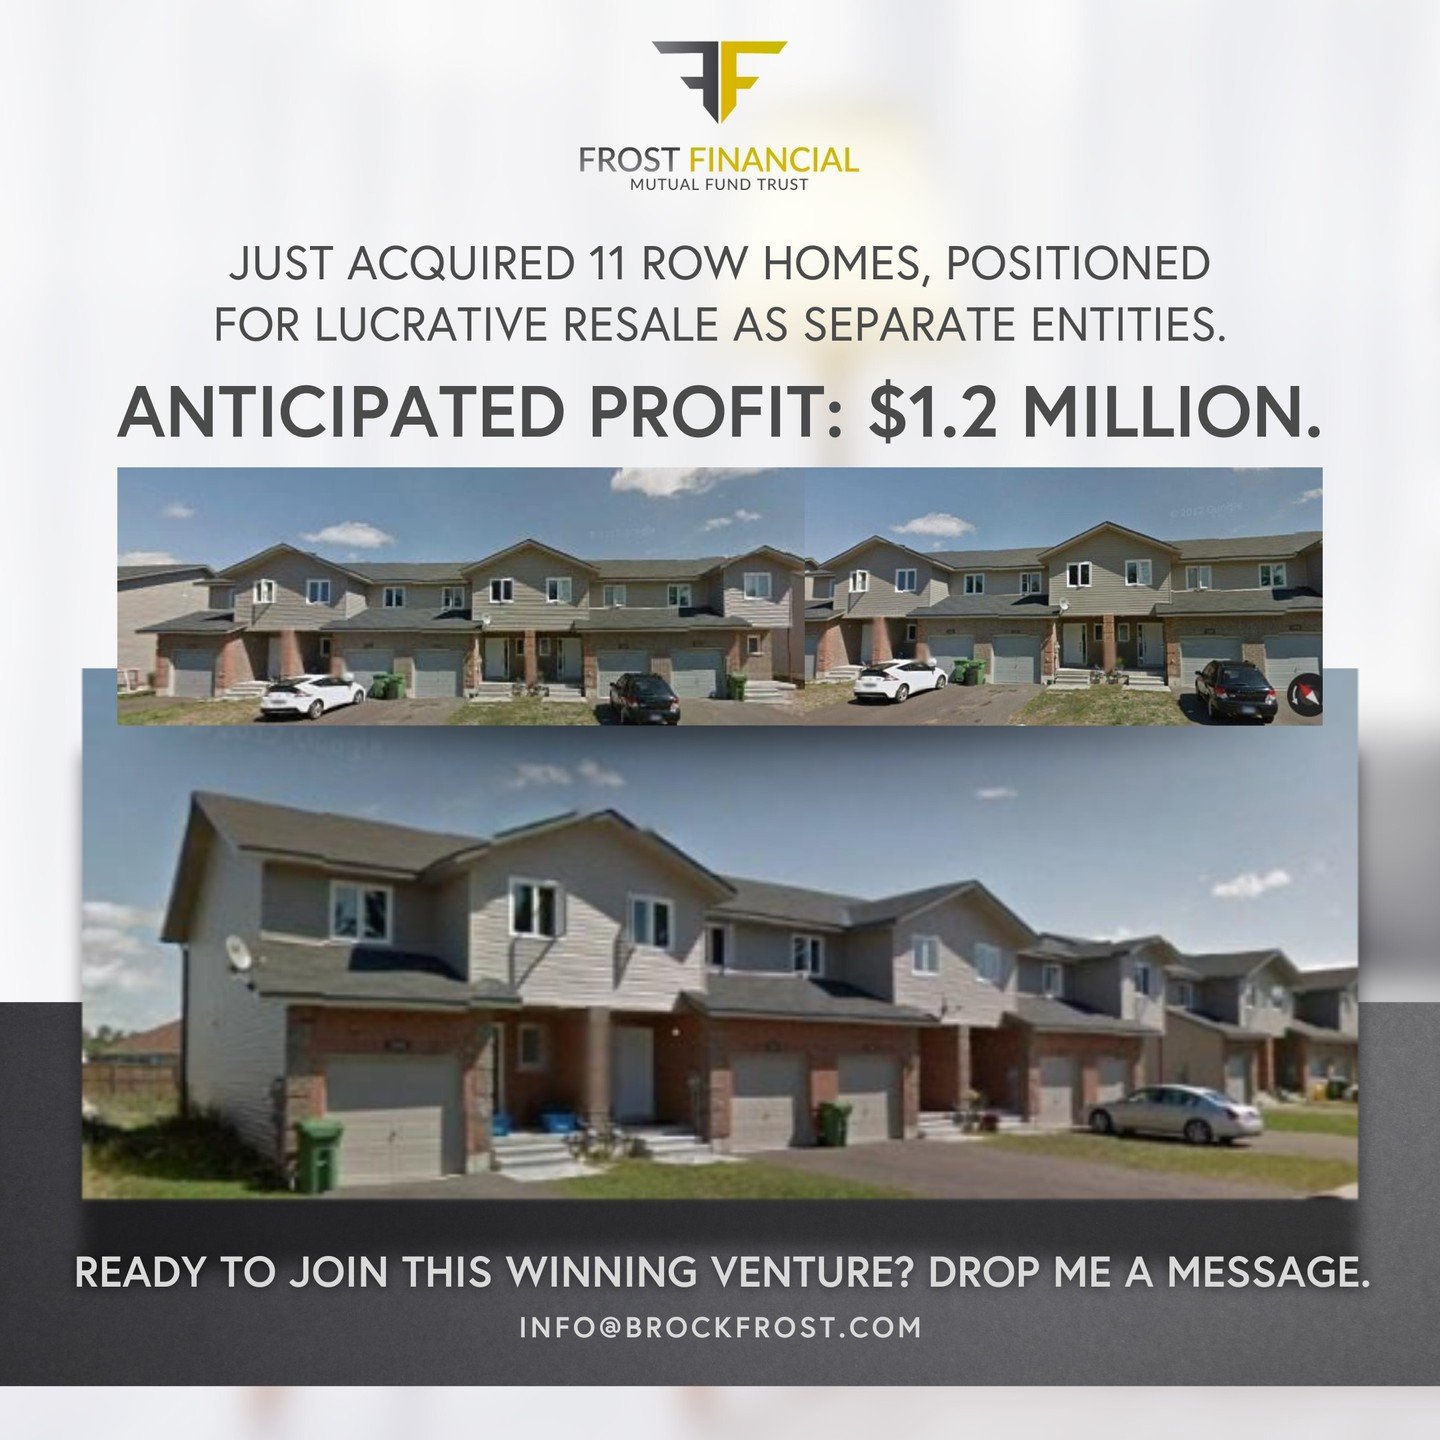 Interested in sharing a $1,200,000 profit? (nods head)

Just locked down a unique opportunity as follows:

1. 11 row homes purchased (accepted offer with deposit provided)
2. Properties are currently ONE legal entity
3. We will proceed with a severan